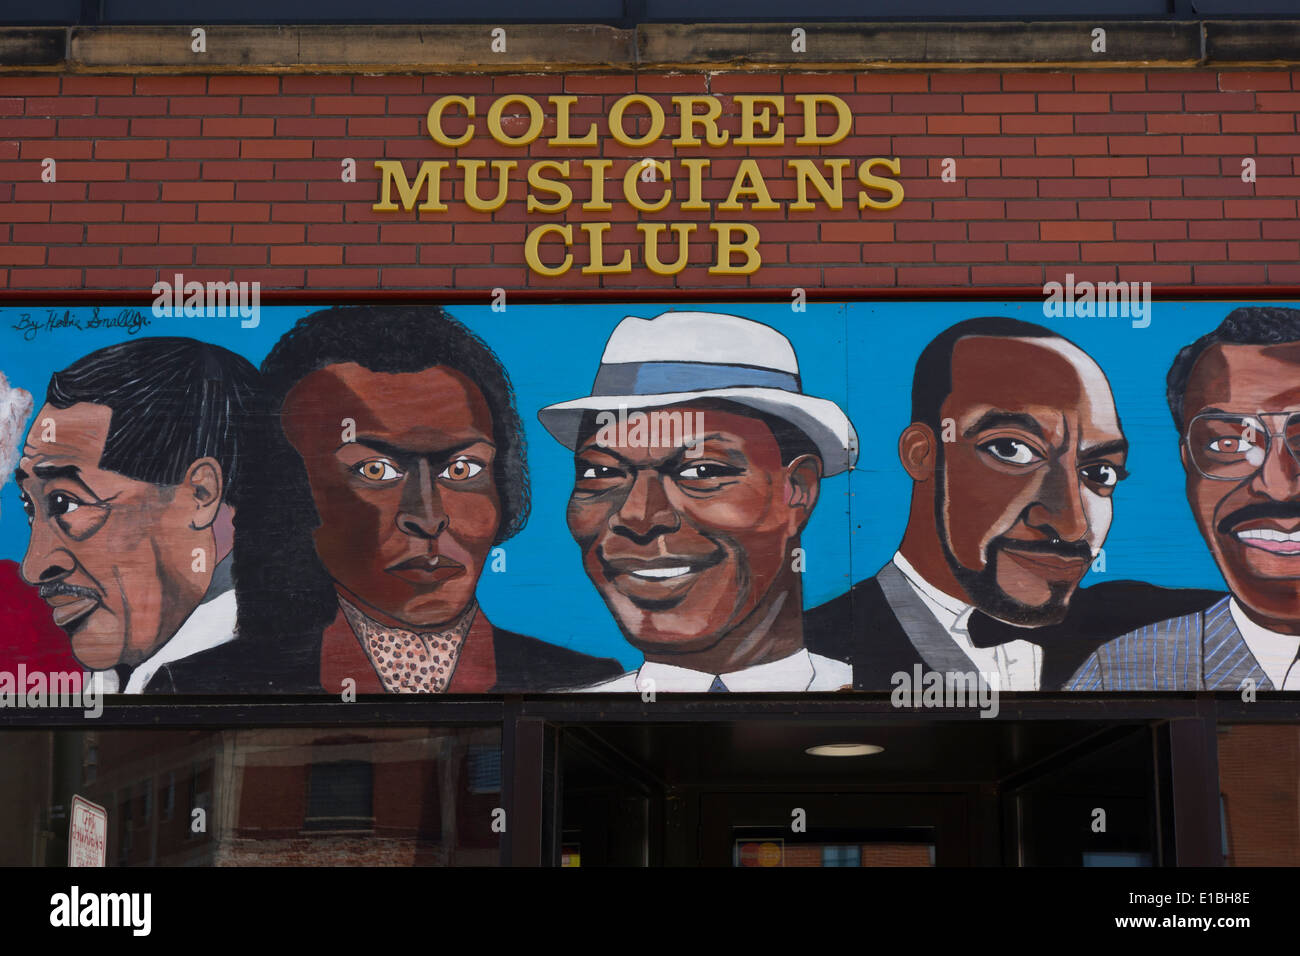 colored musicians club in Buffalo New York Stock Photo